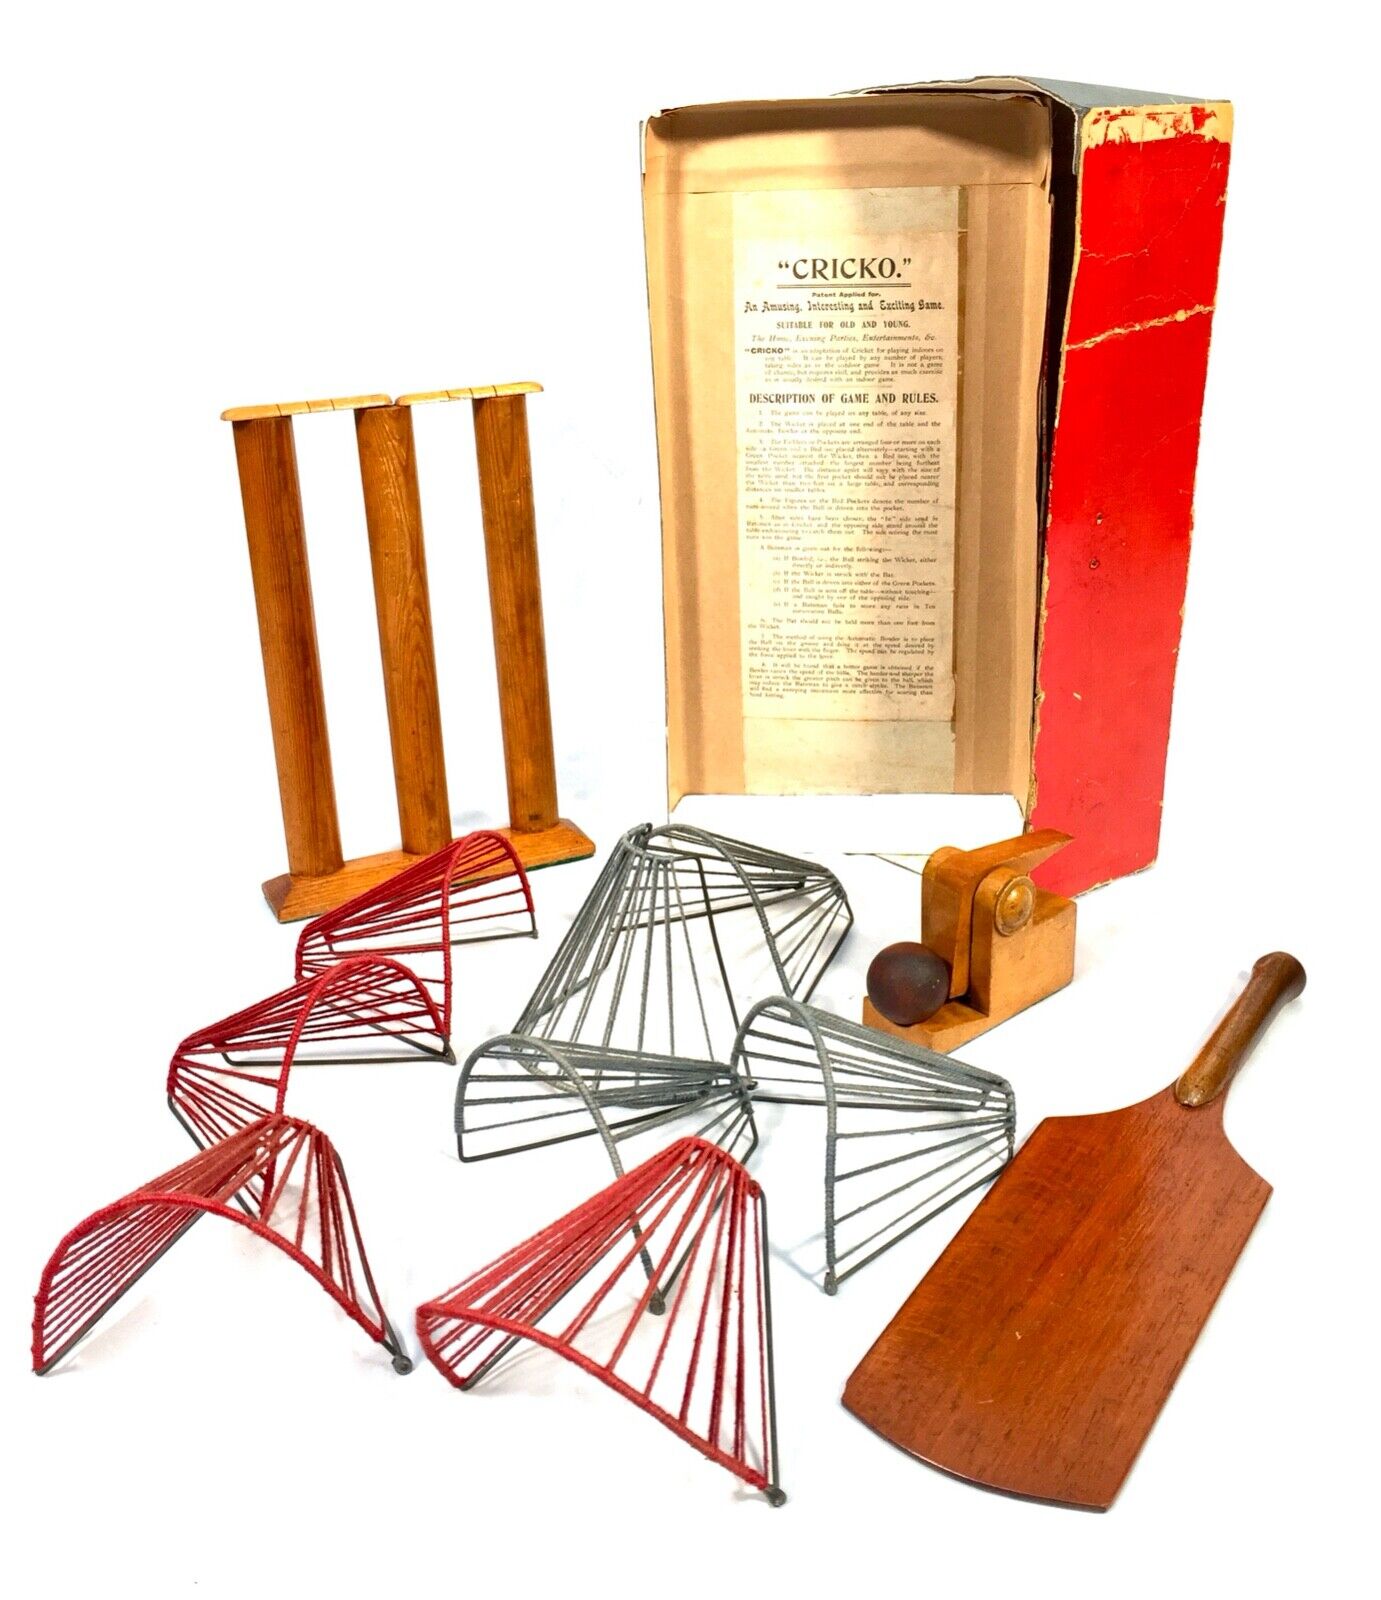 Antique Tabletop Cricket Game Toy in Original Box by The Cricko Company, London